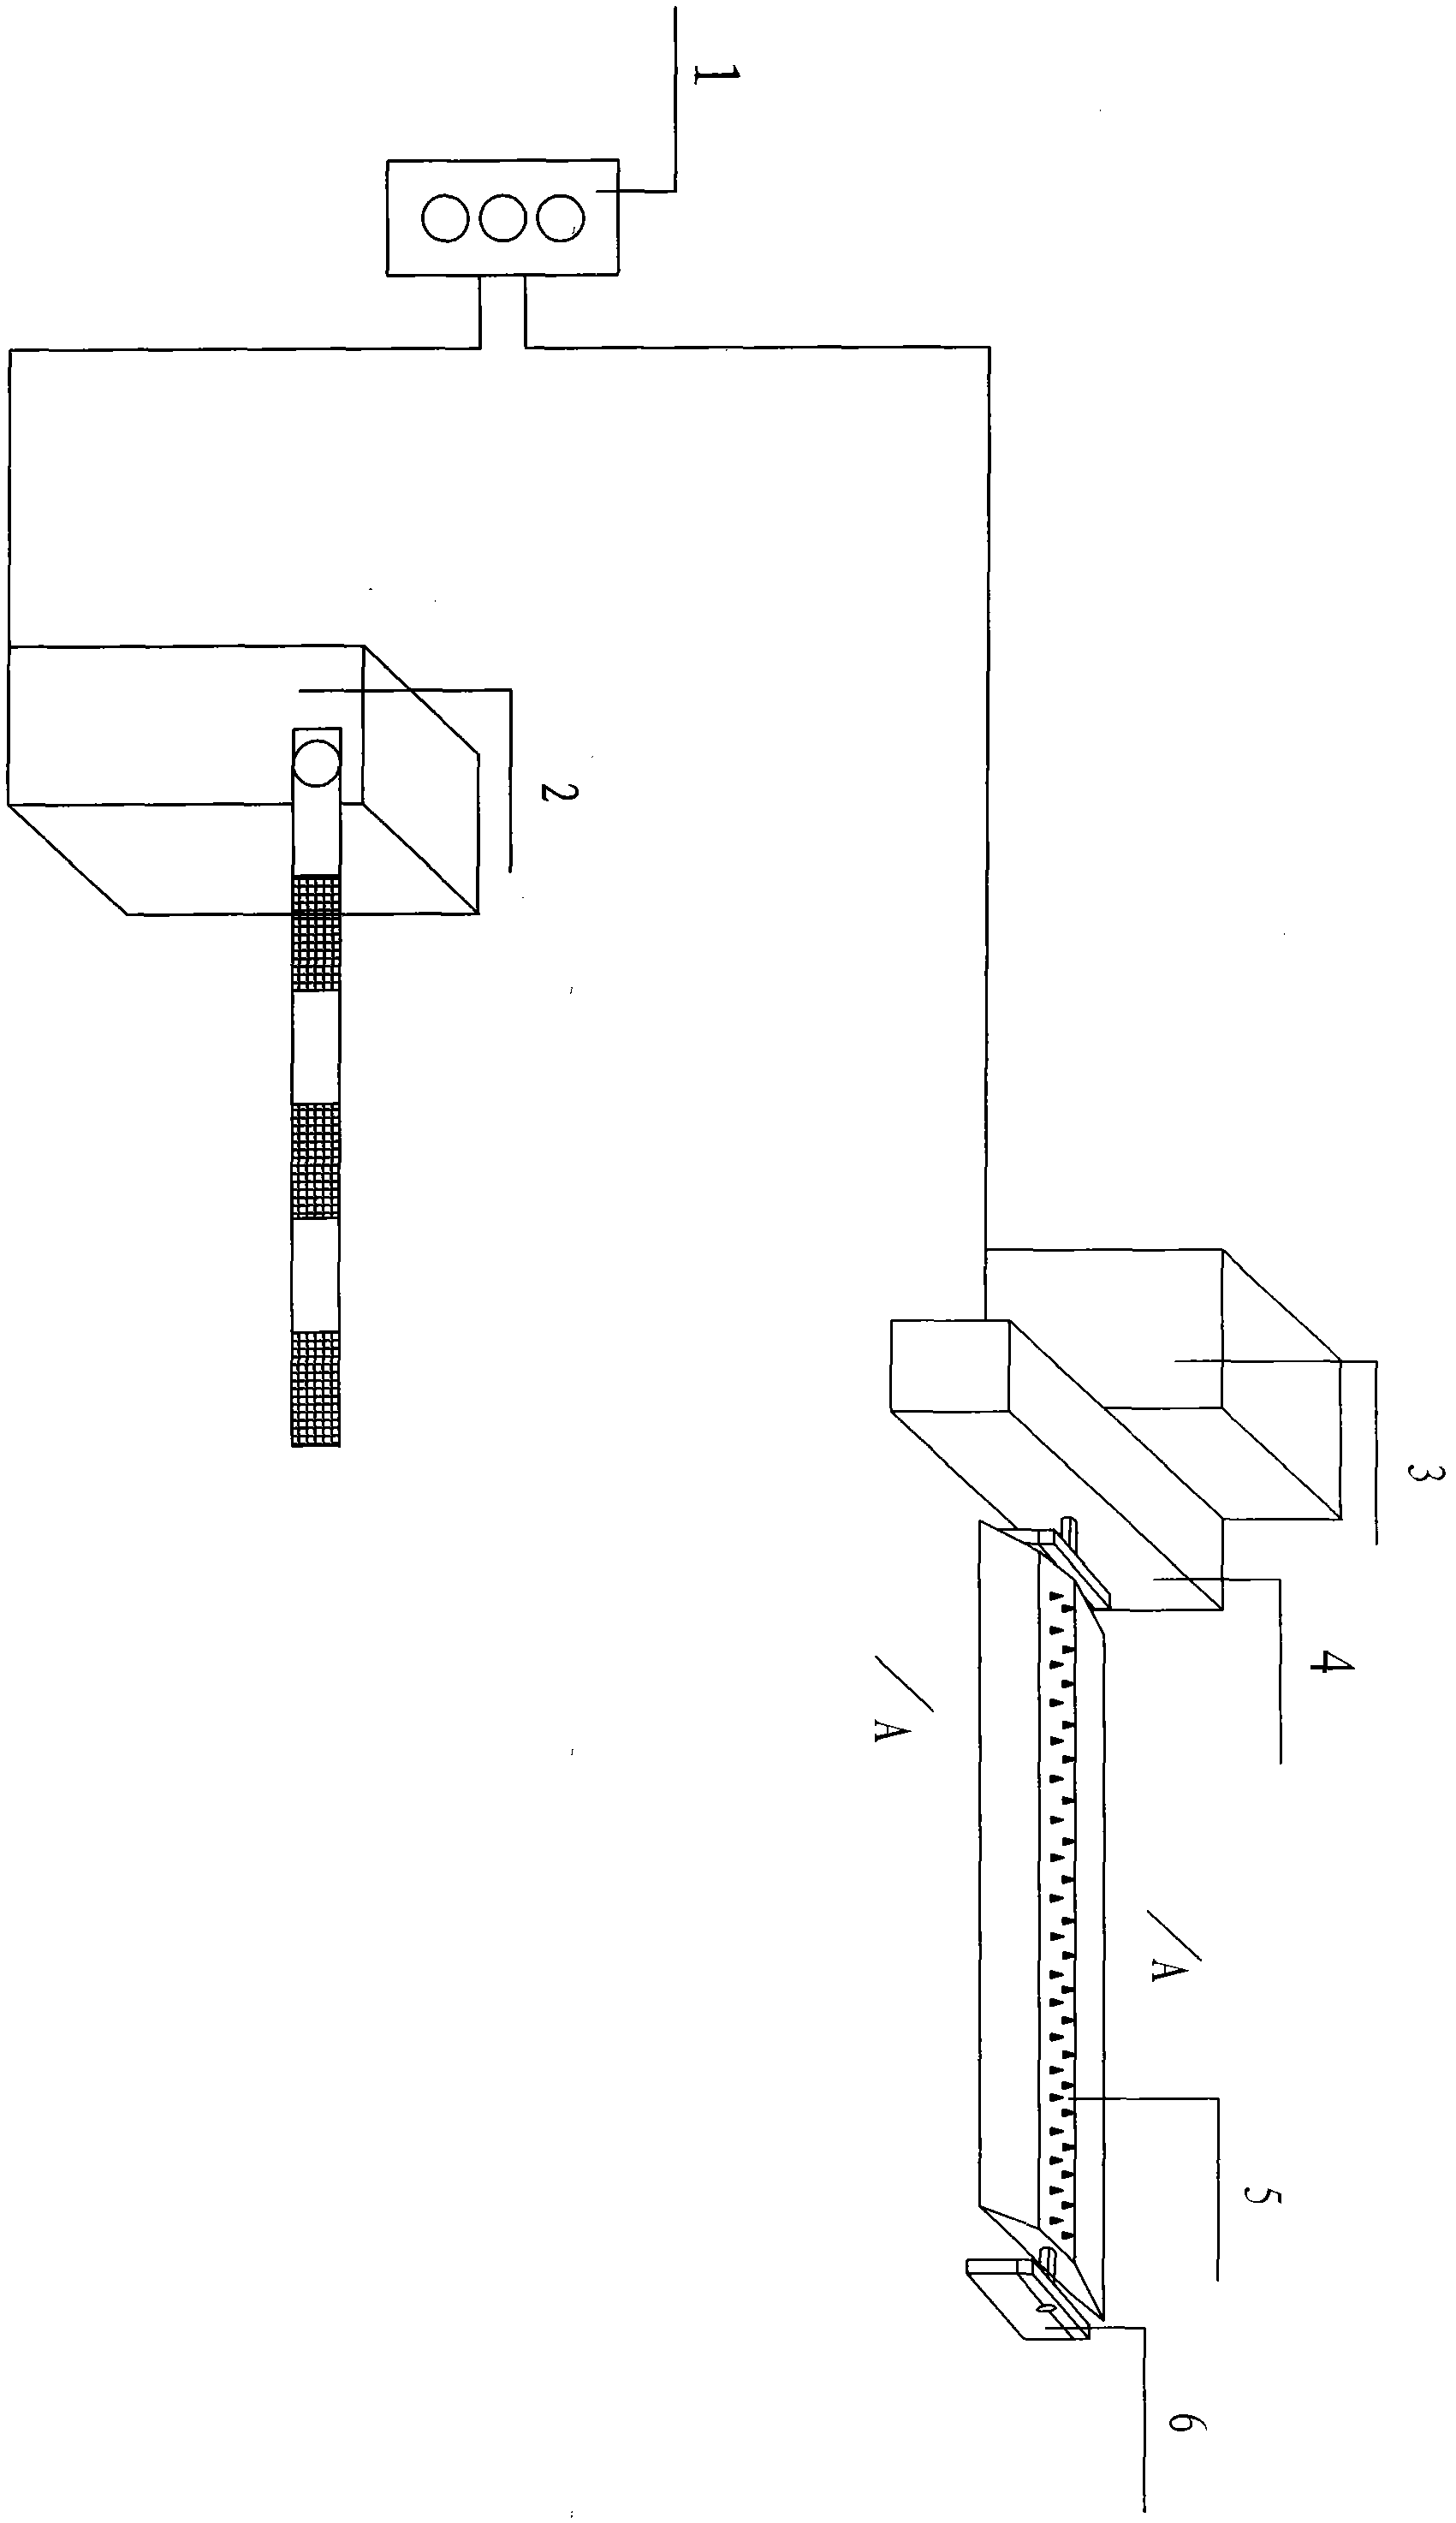 Gateway system linkage device for avoiding rushing through malevolently